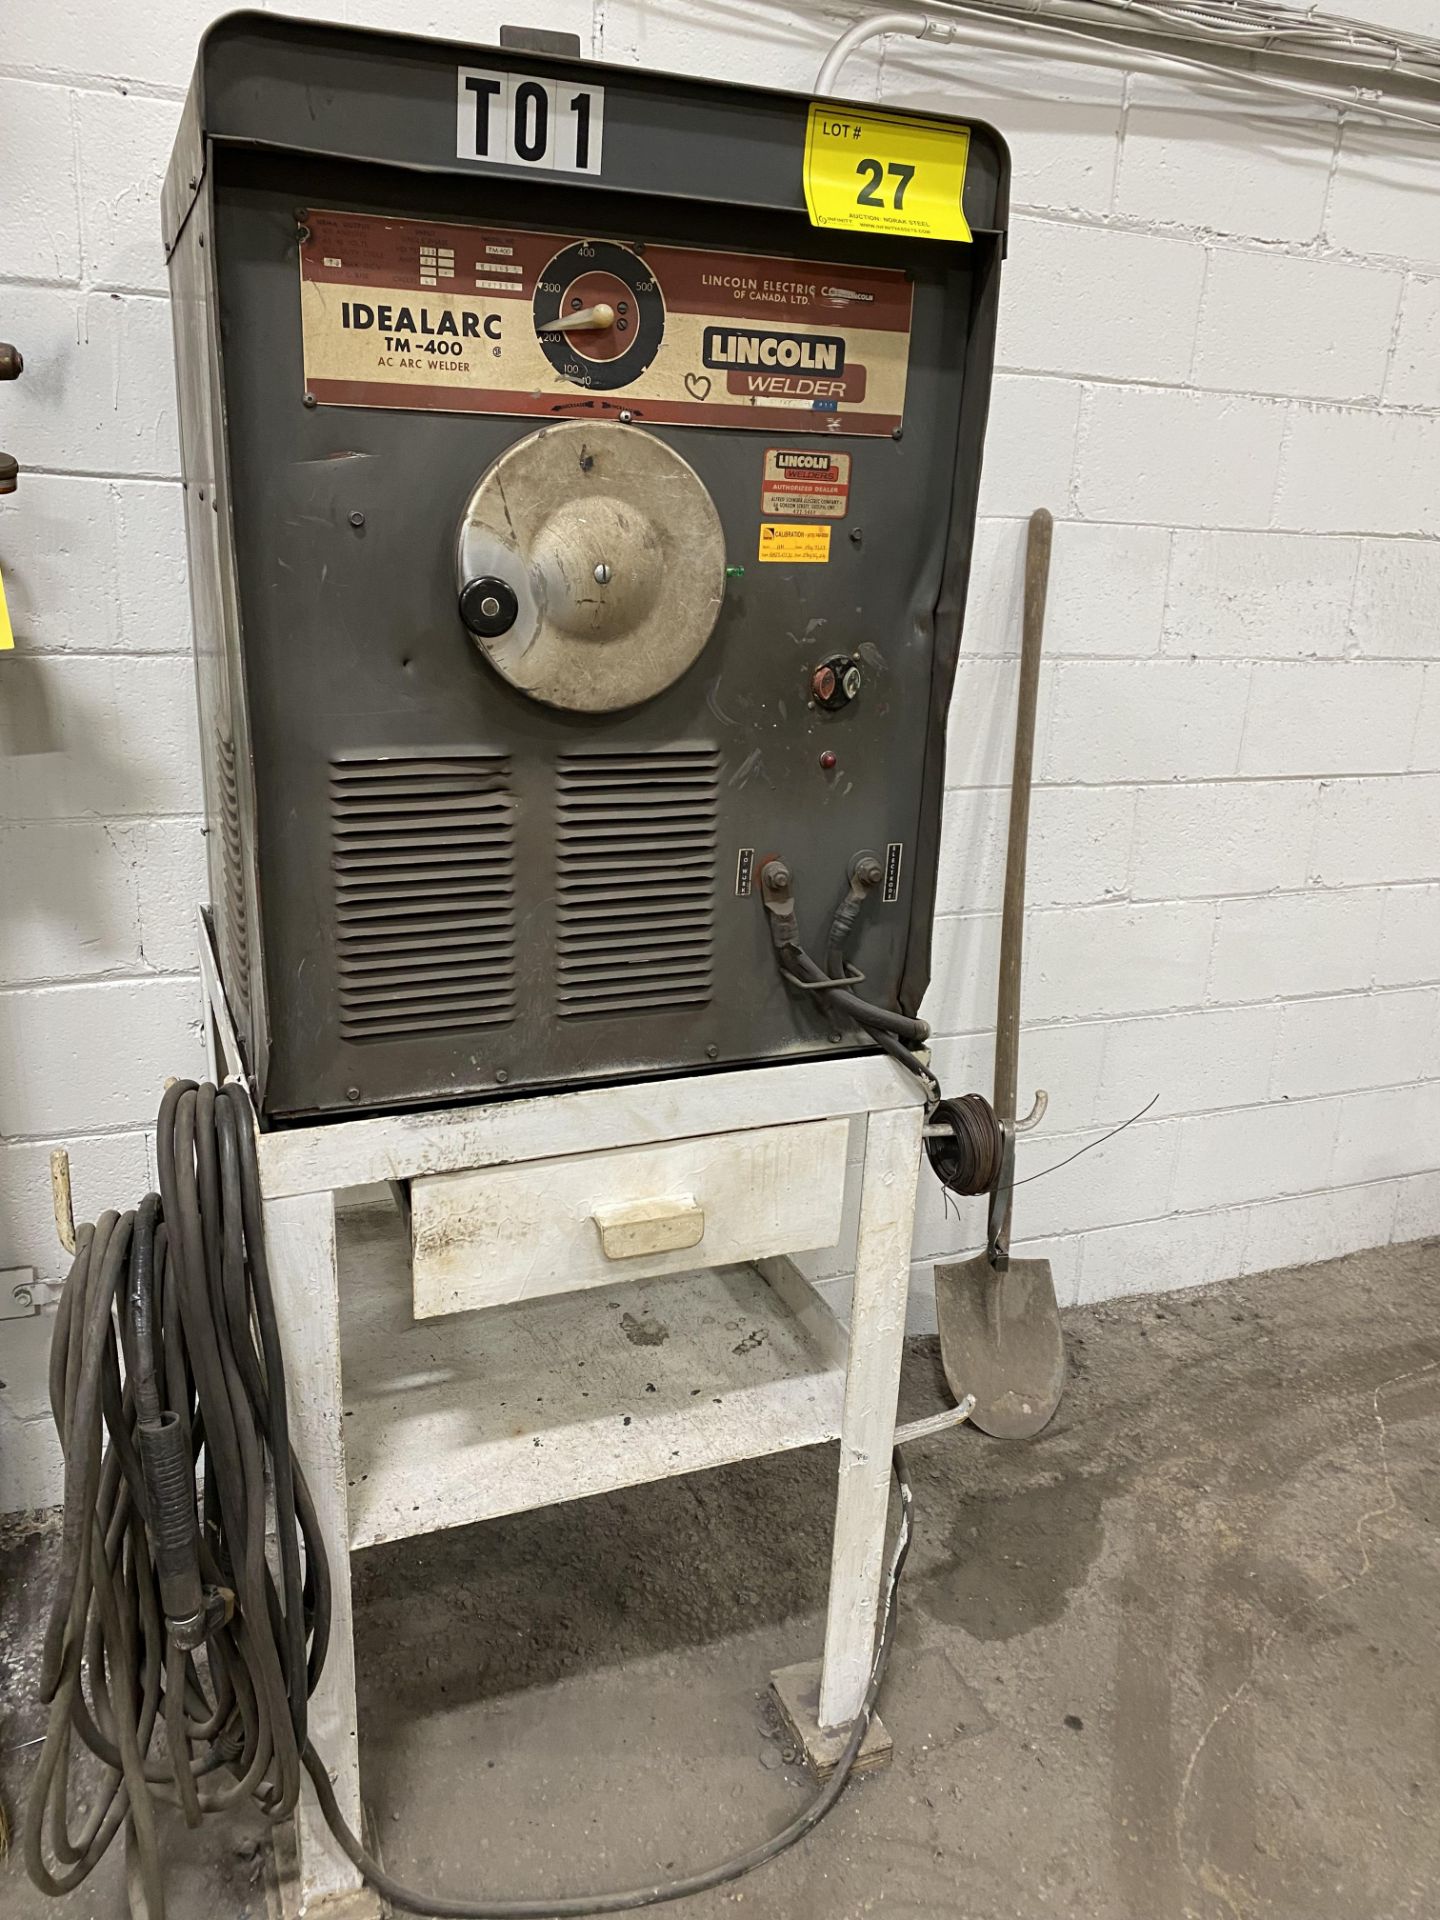 LINCOLN ELECTRIC IDEALARC TM-400 WELDER W/ CABLES, STAND